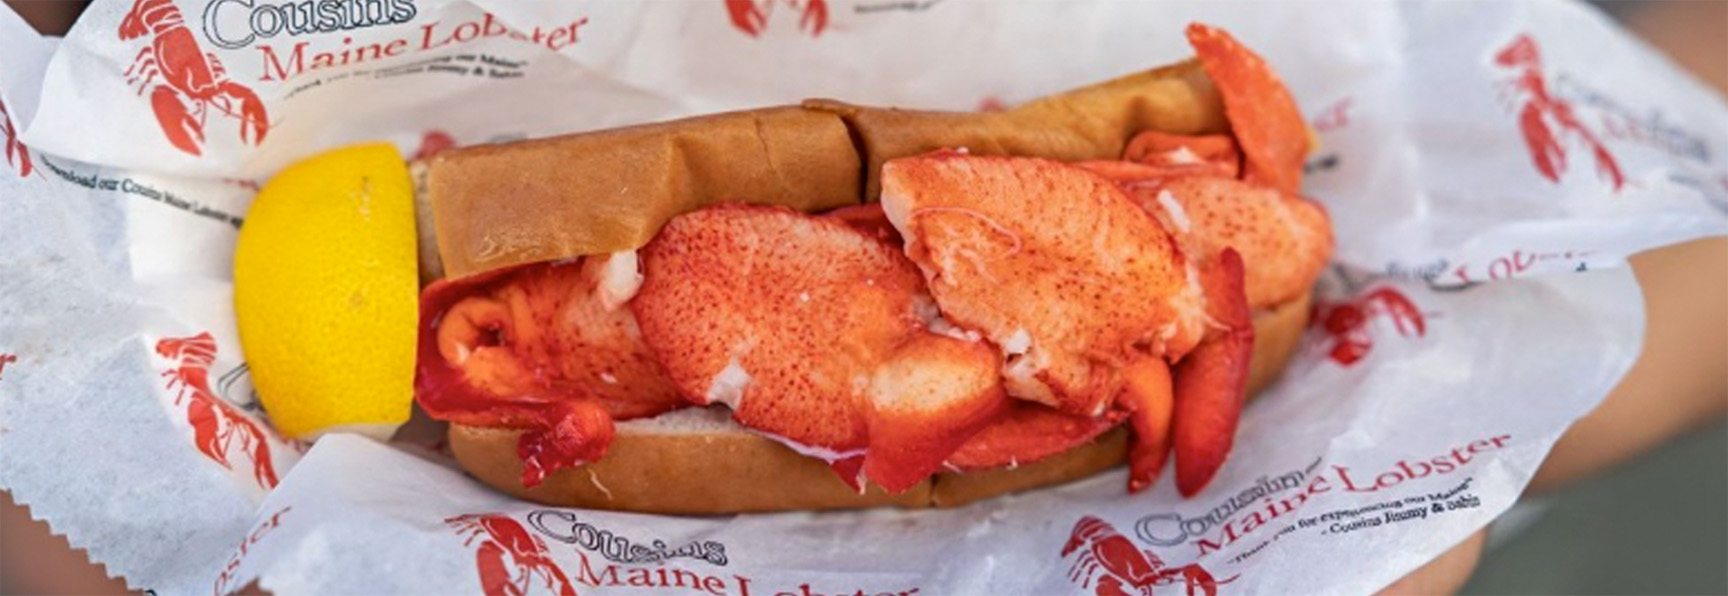 Cousin's of Maine Lobster Roll